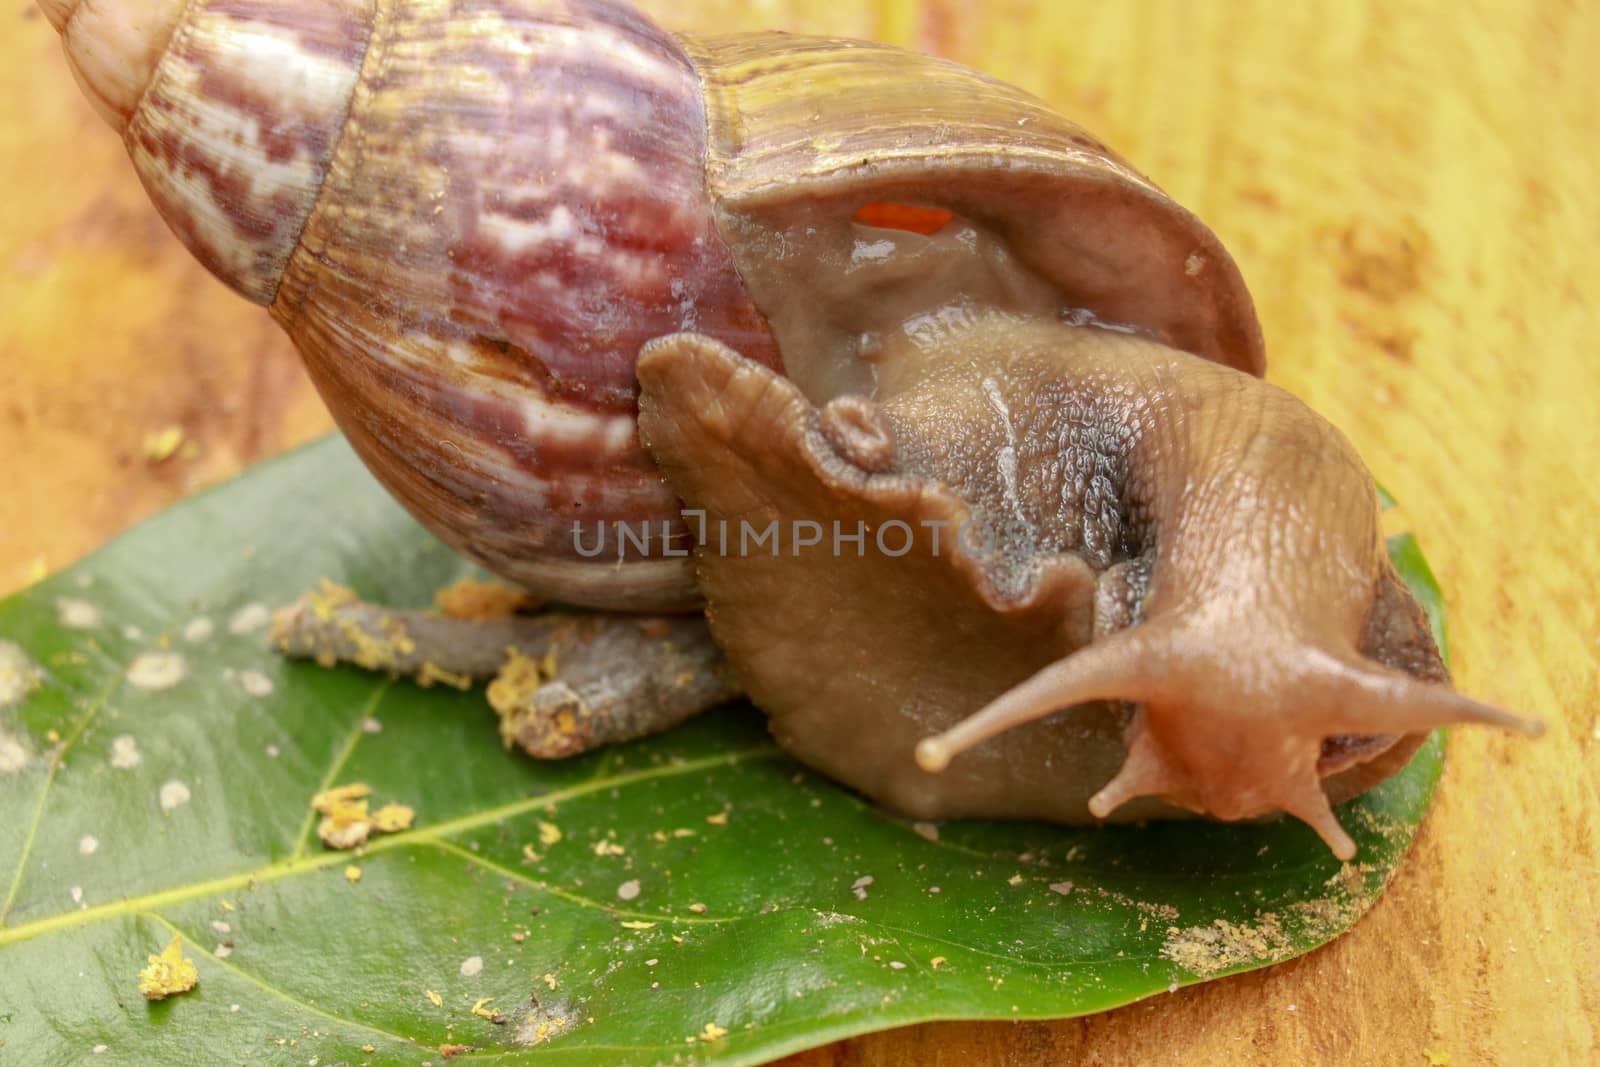 Giant African Land Snail - Achatina fulica large land snail in Achatinidae, similar to Achatina achatina and Archachatina marginata, pest issues, invasive species of snail by Sanatana2008